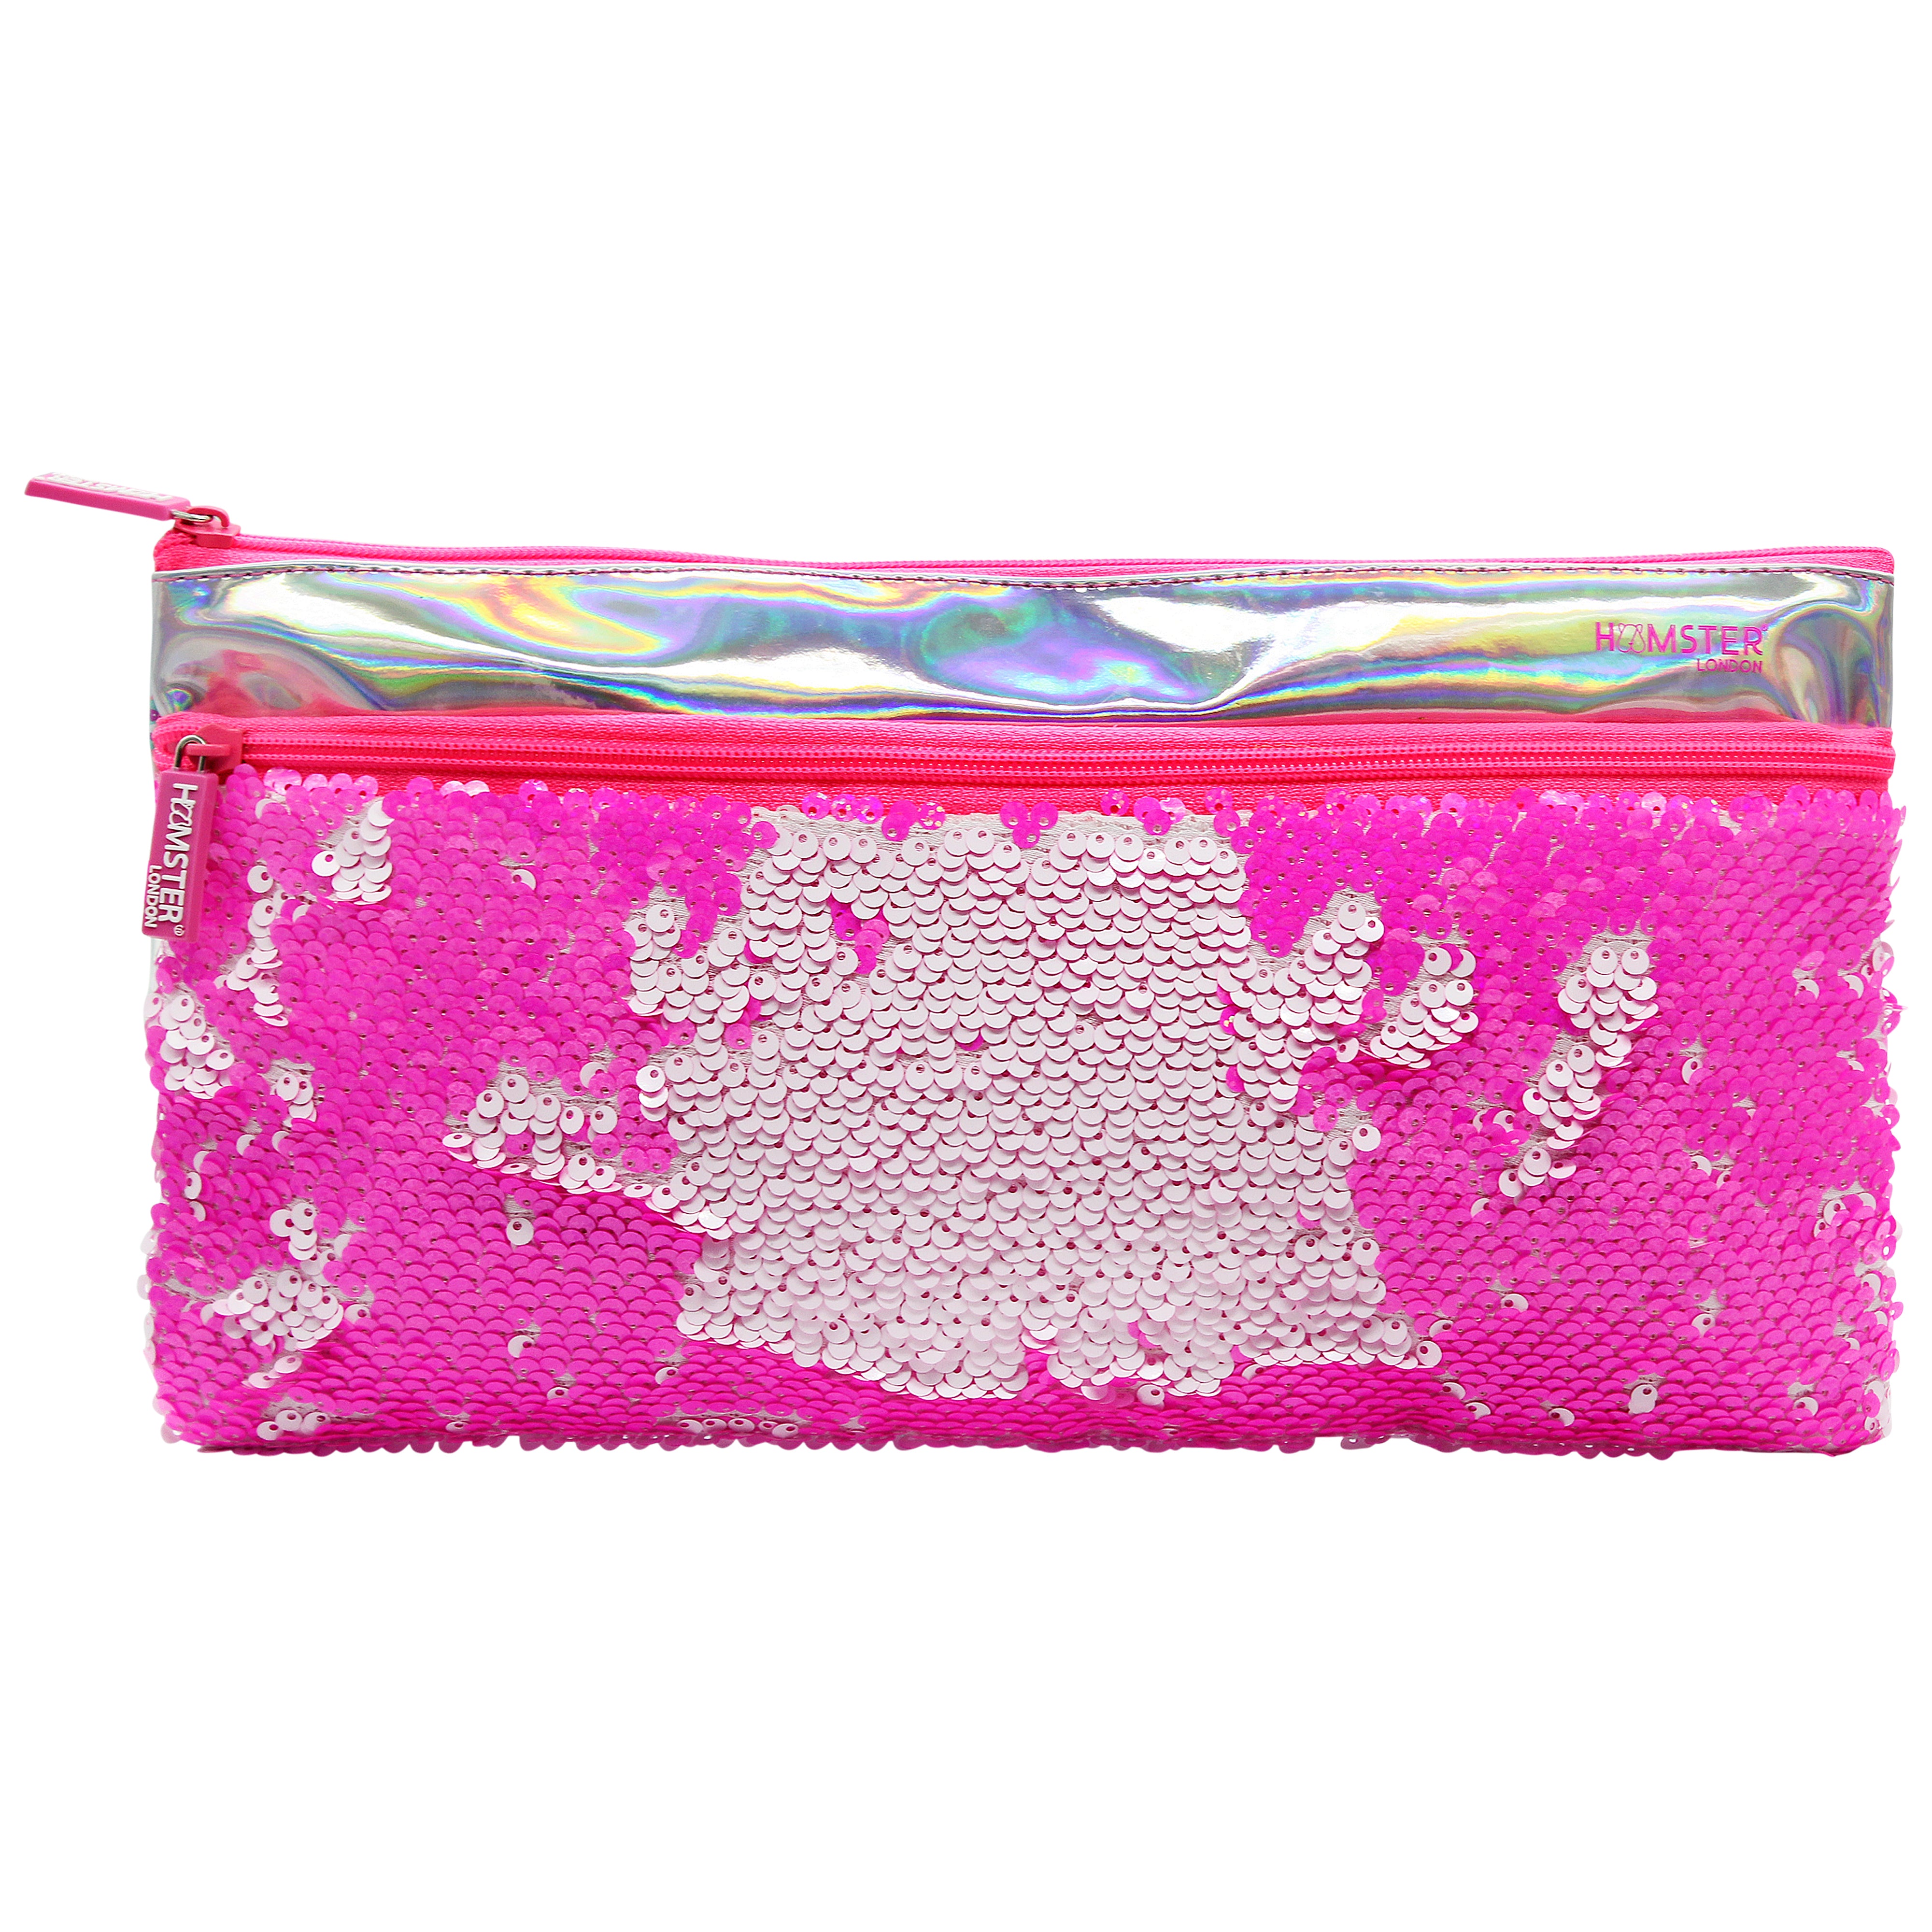 Sequence makeup Pouch Lama